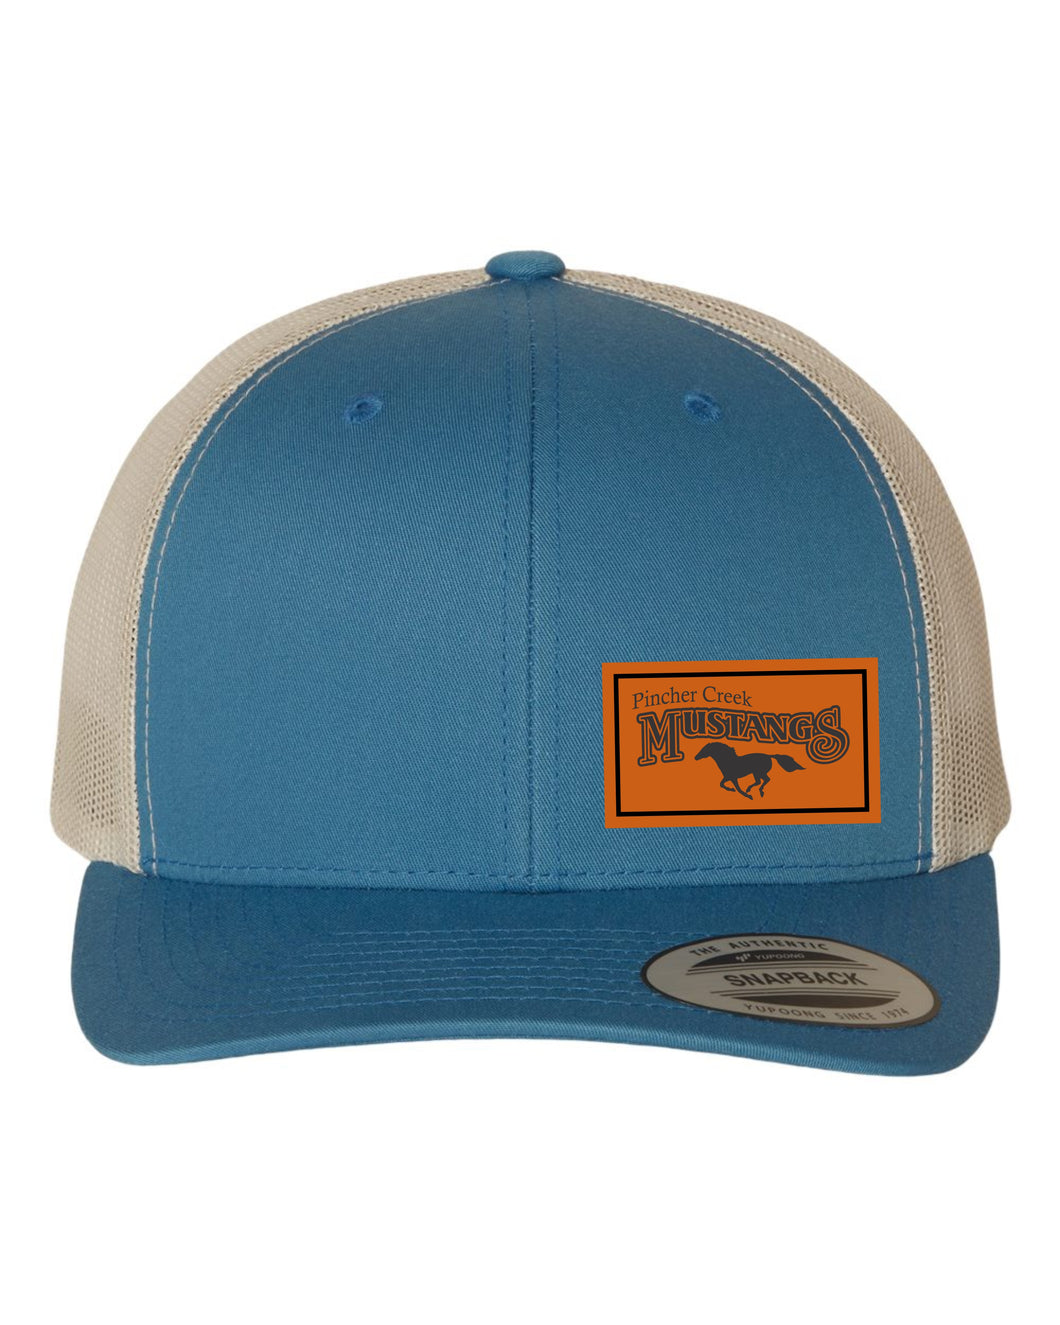 CURVED BRIM HAT WITH MUSTANGS LEATHER PATCH LOGO